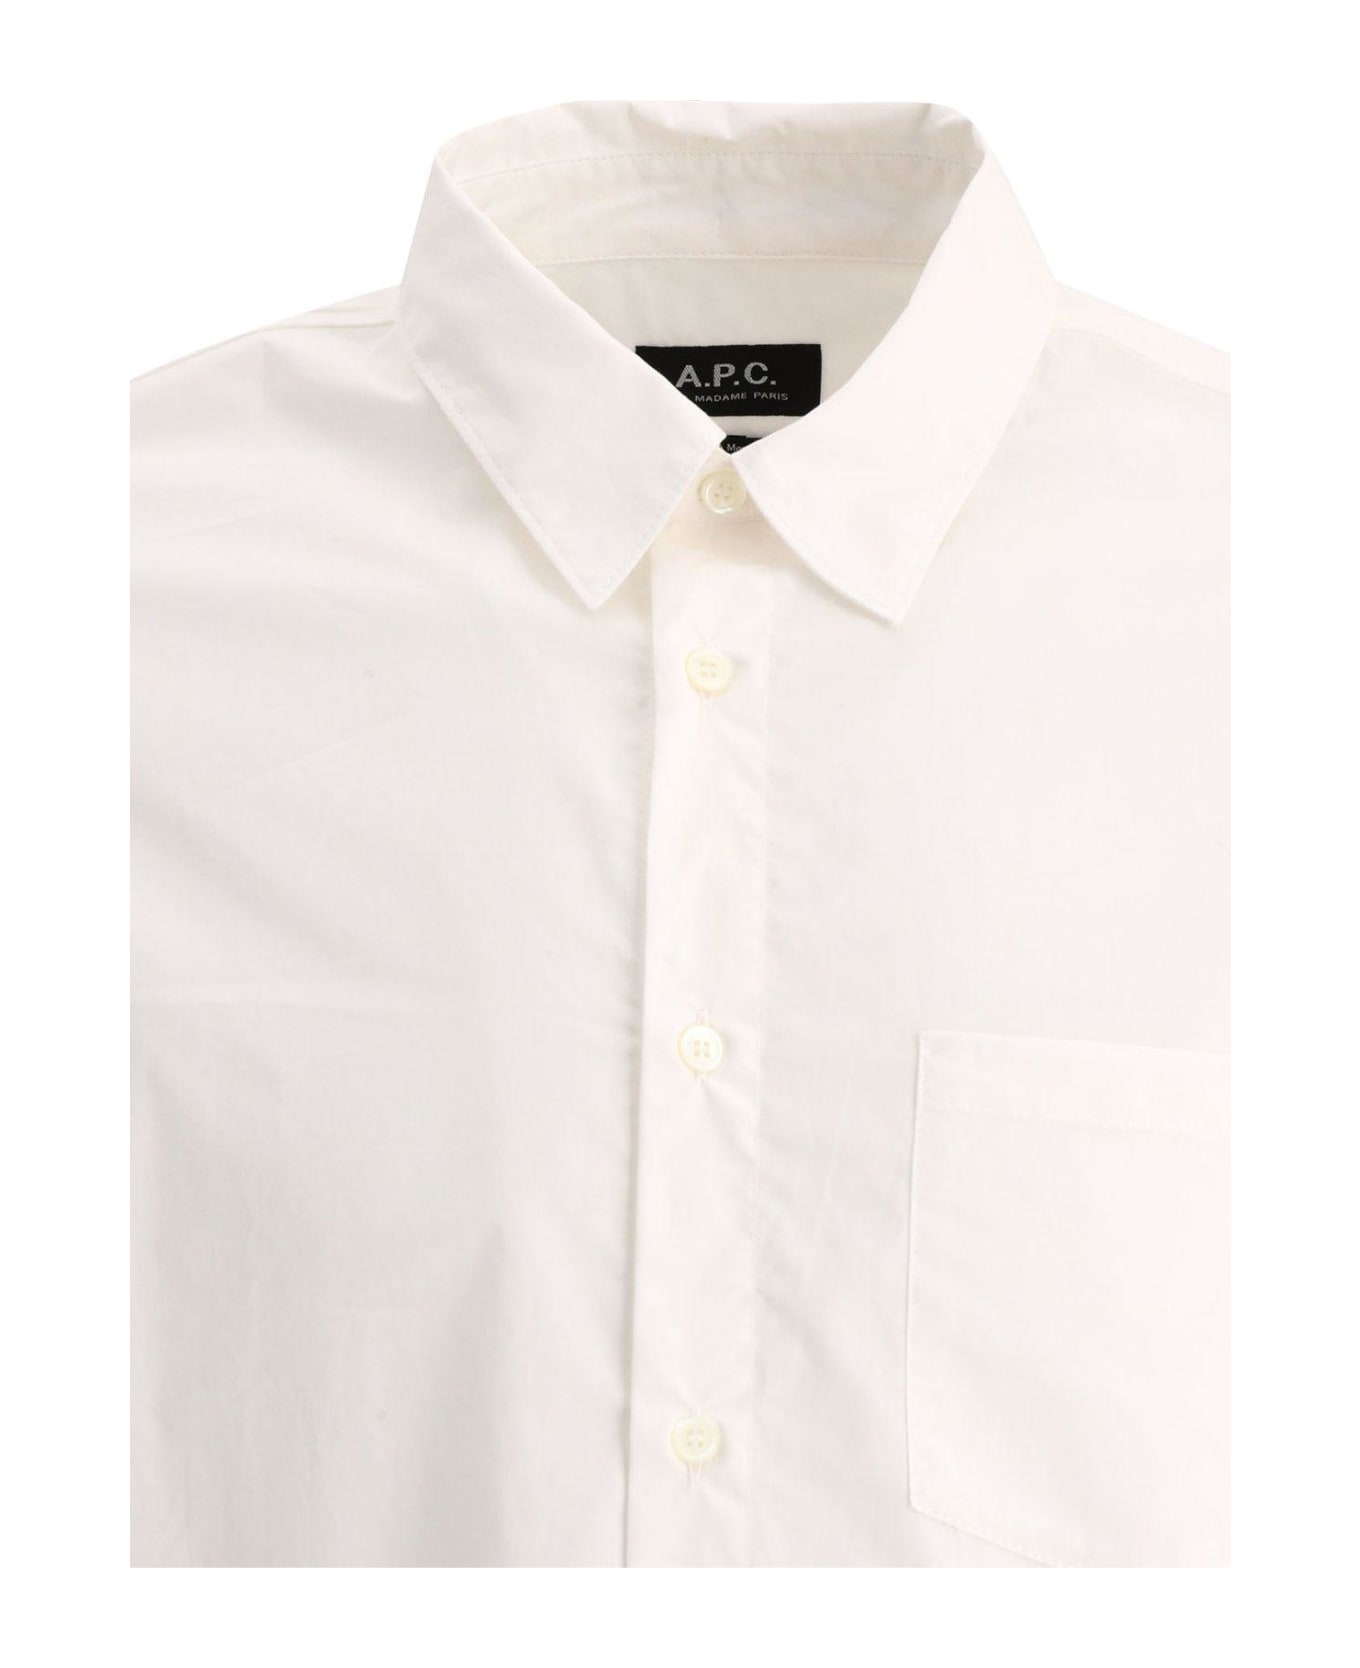 A.P.C. Buttoned Long-sleeved Shirt - Aab White シャツ